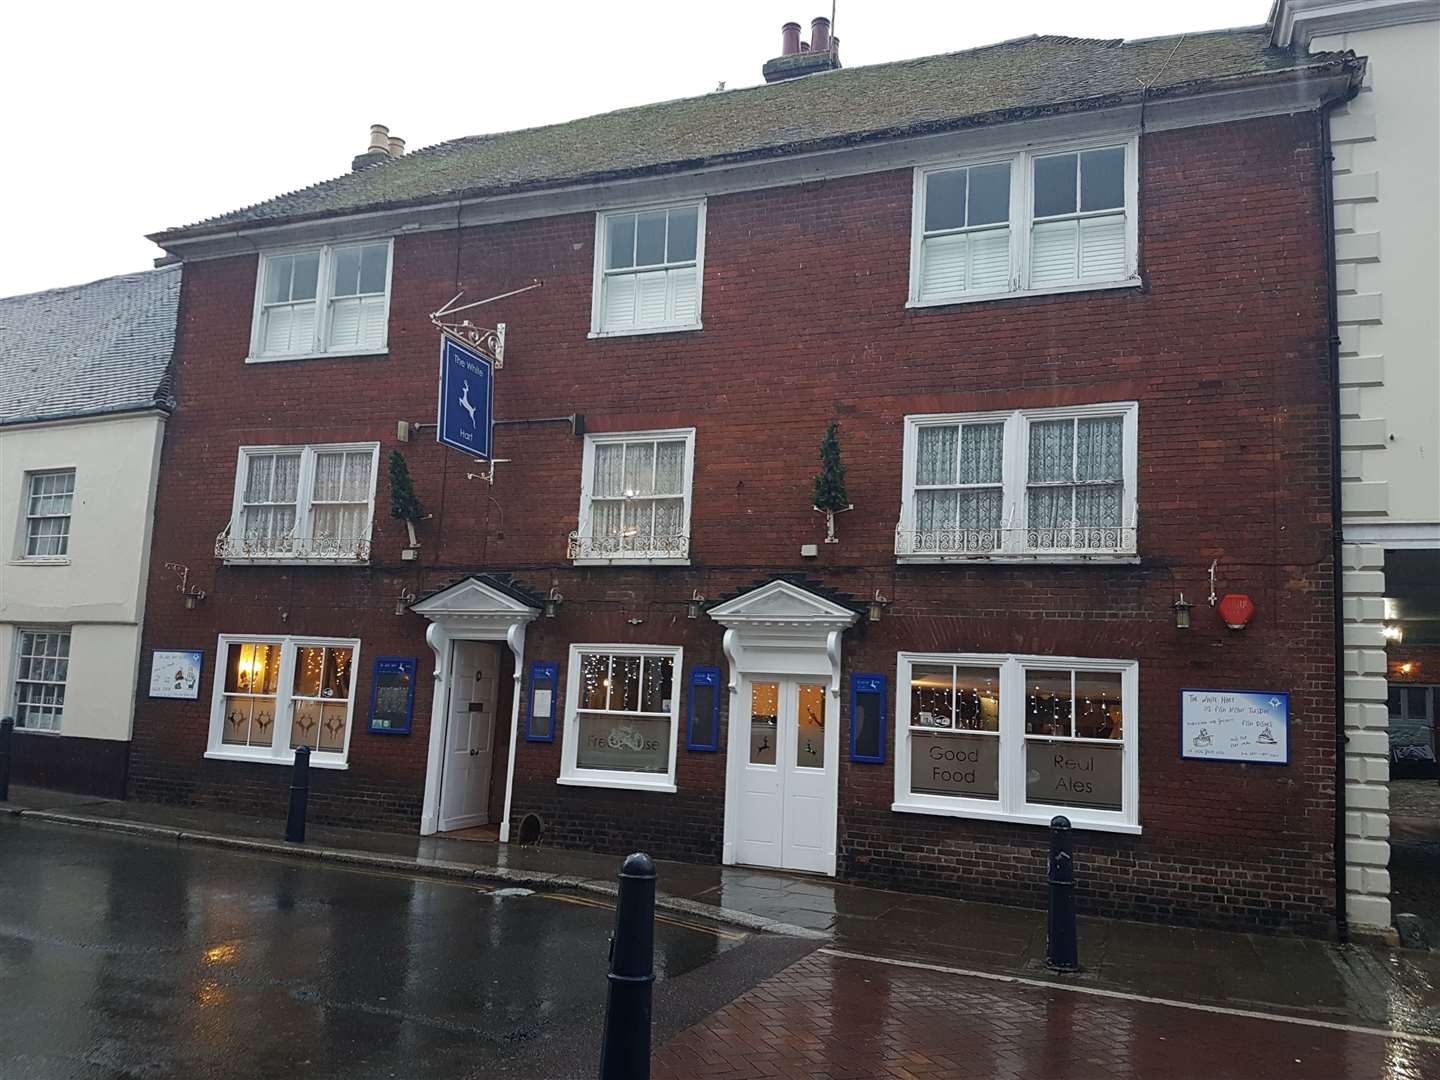 The White Hart will now reopen